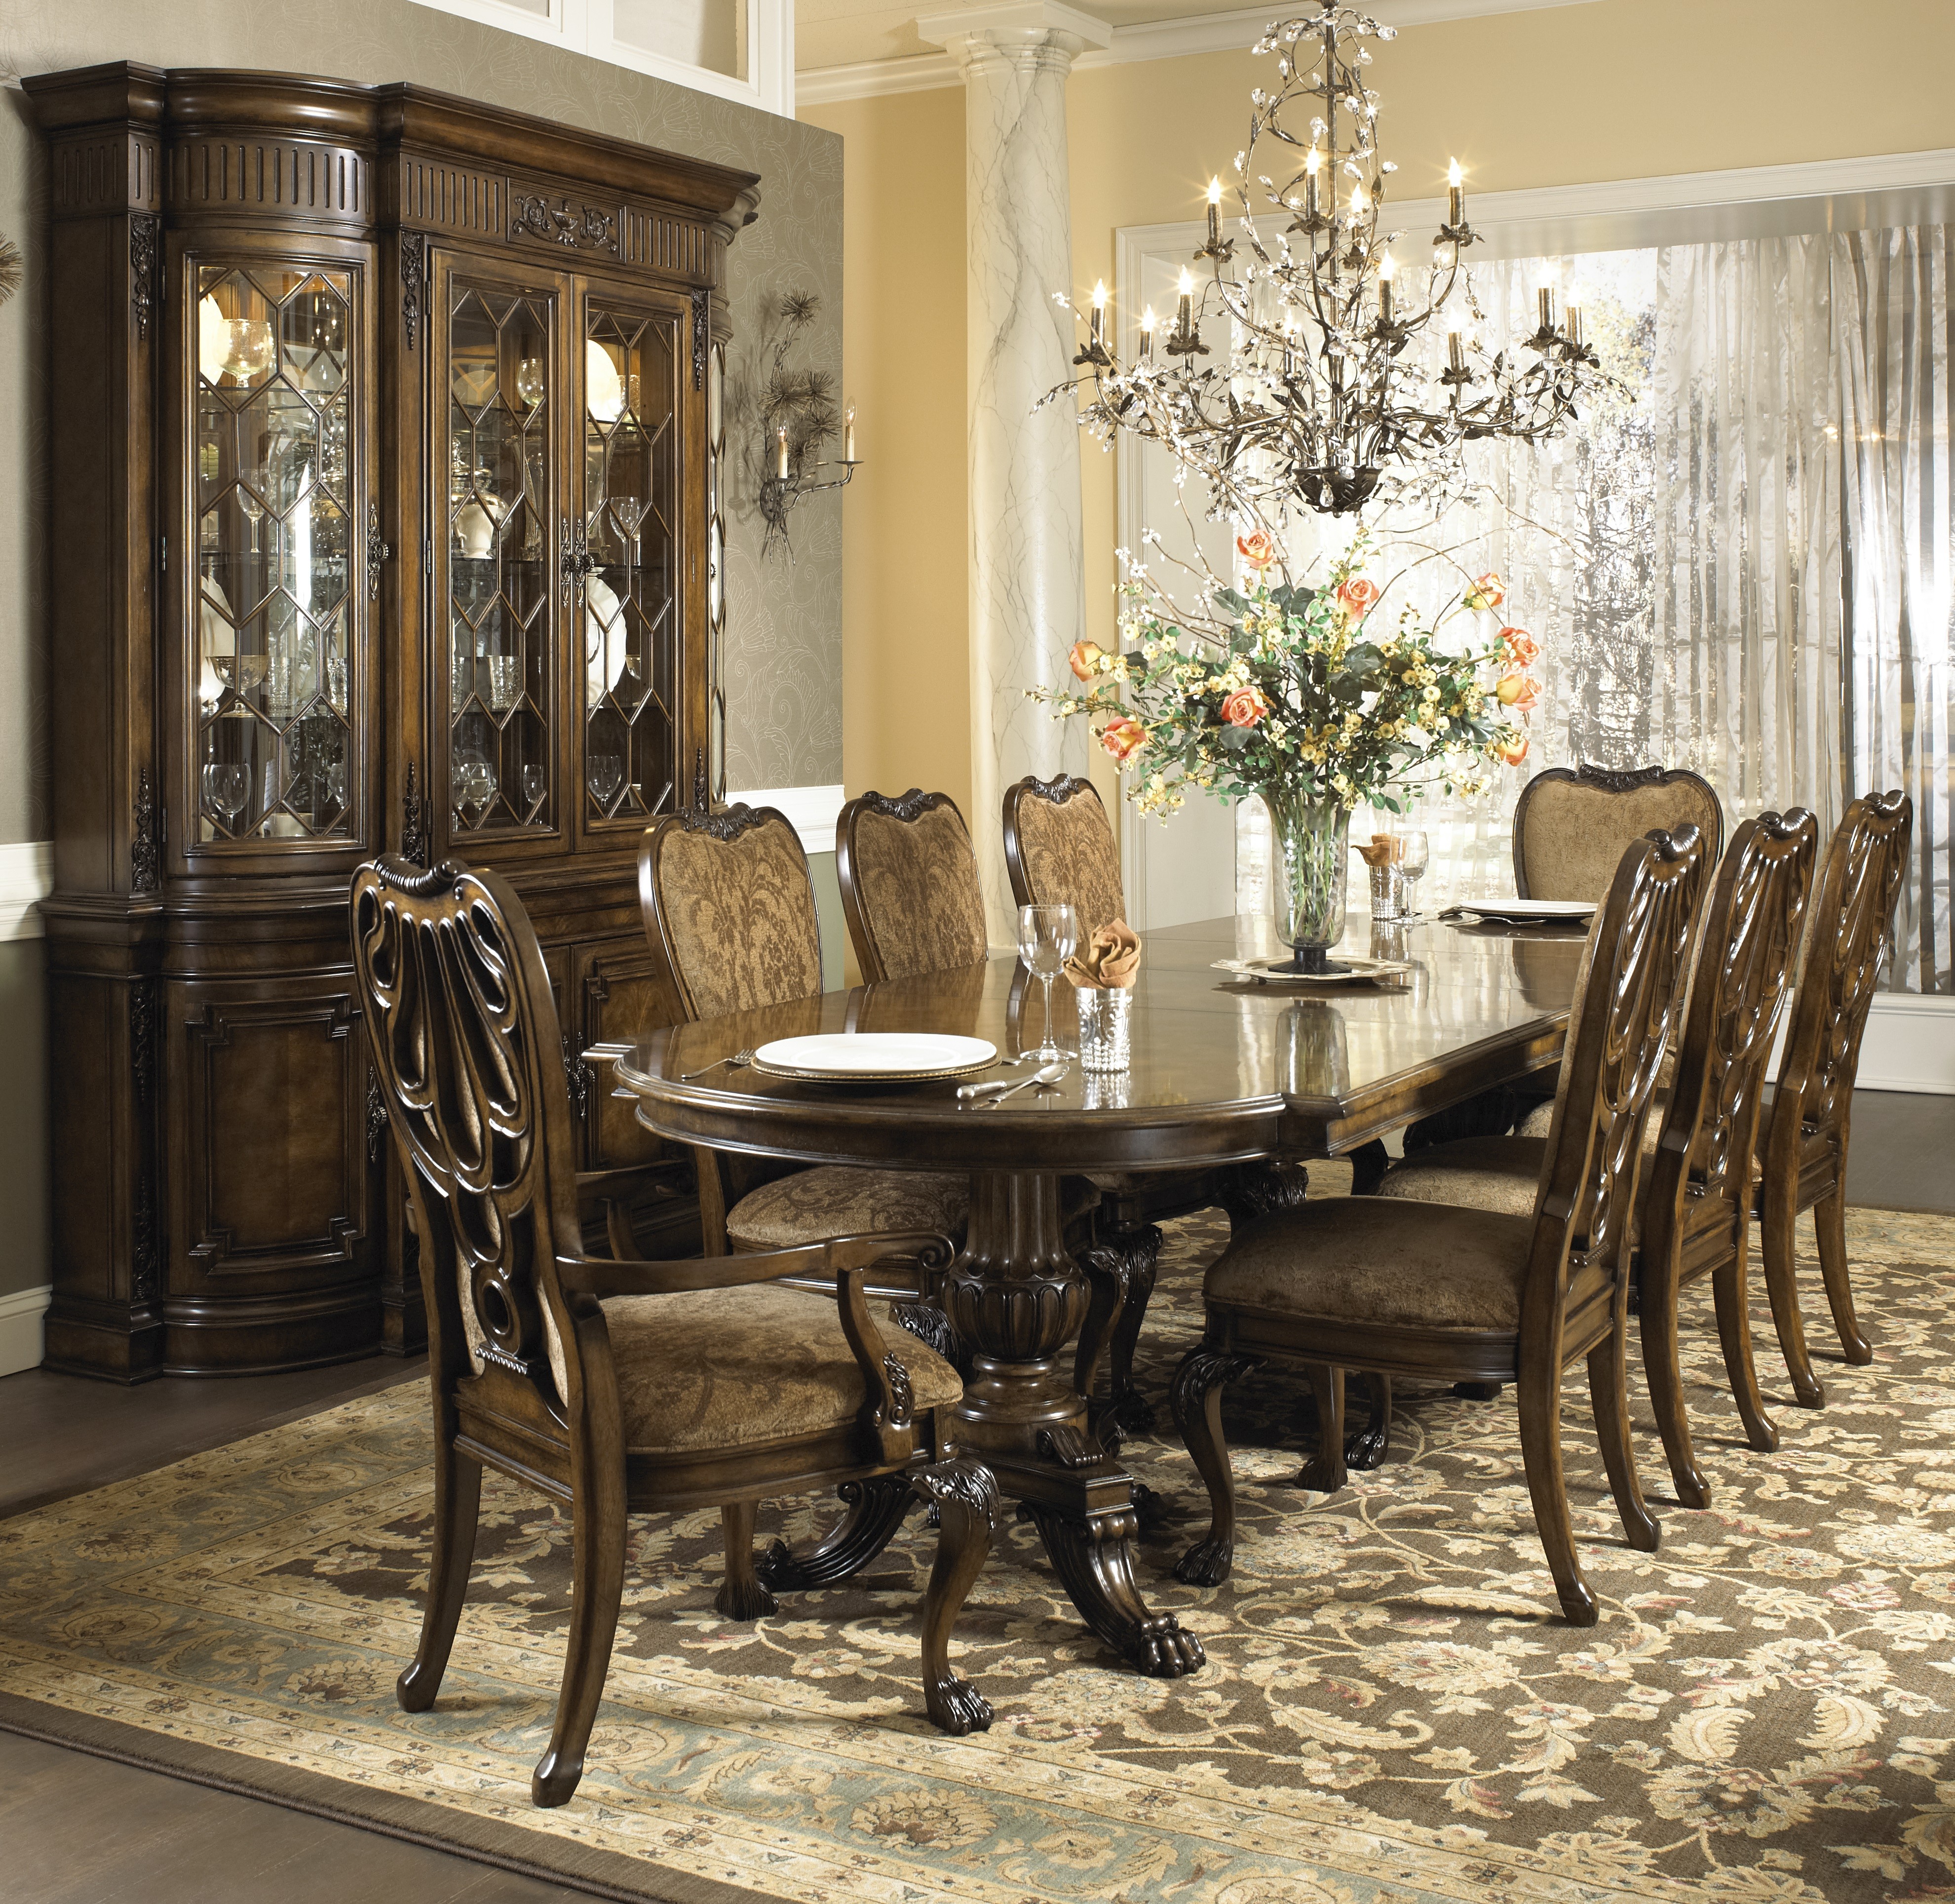 Buy The Belvedere Dining Room Set by Fine Furniture Design from  www.Traveller Location.